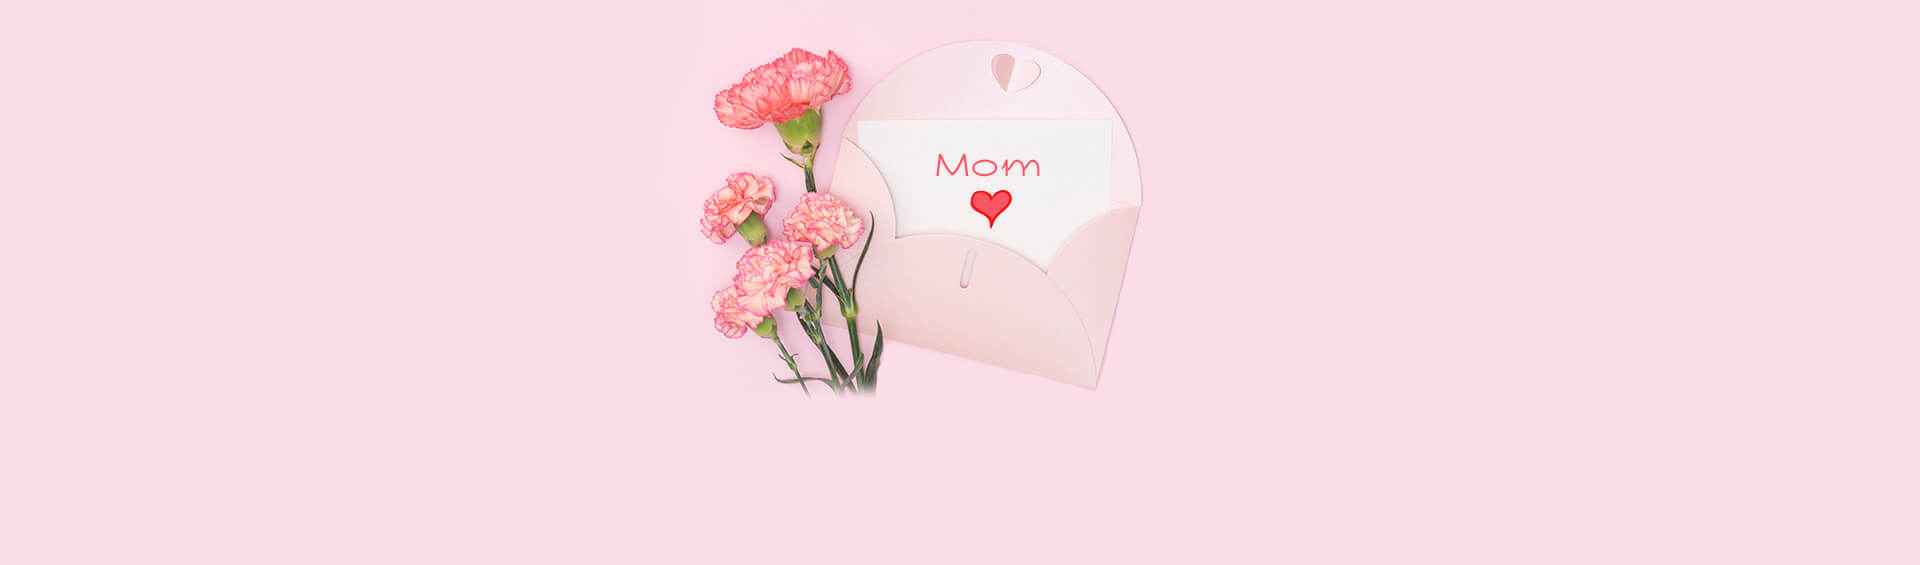 Happy Mother’s Day Email Campaign Ideas You Will Adore